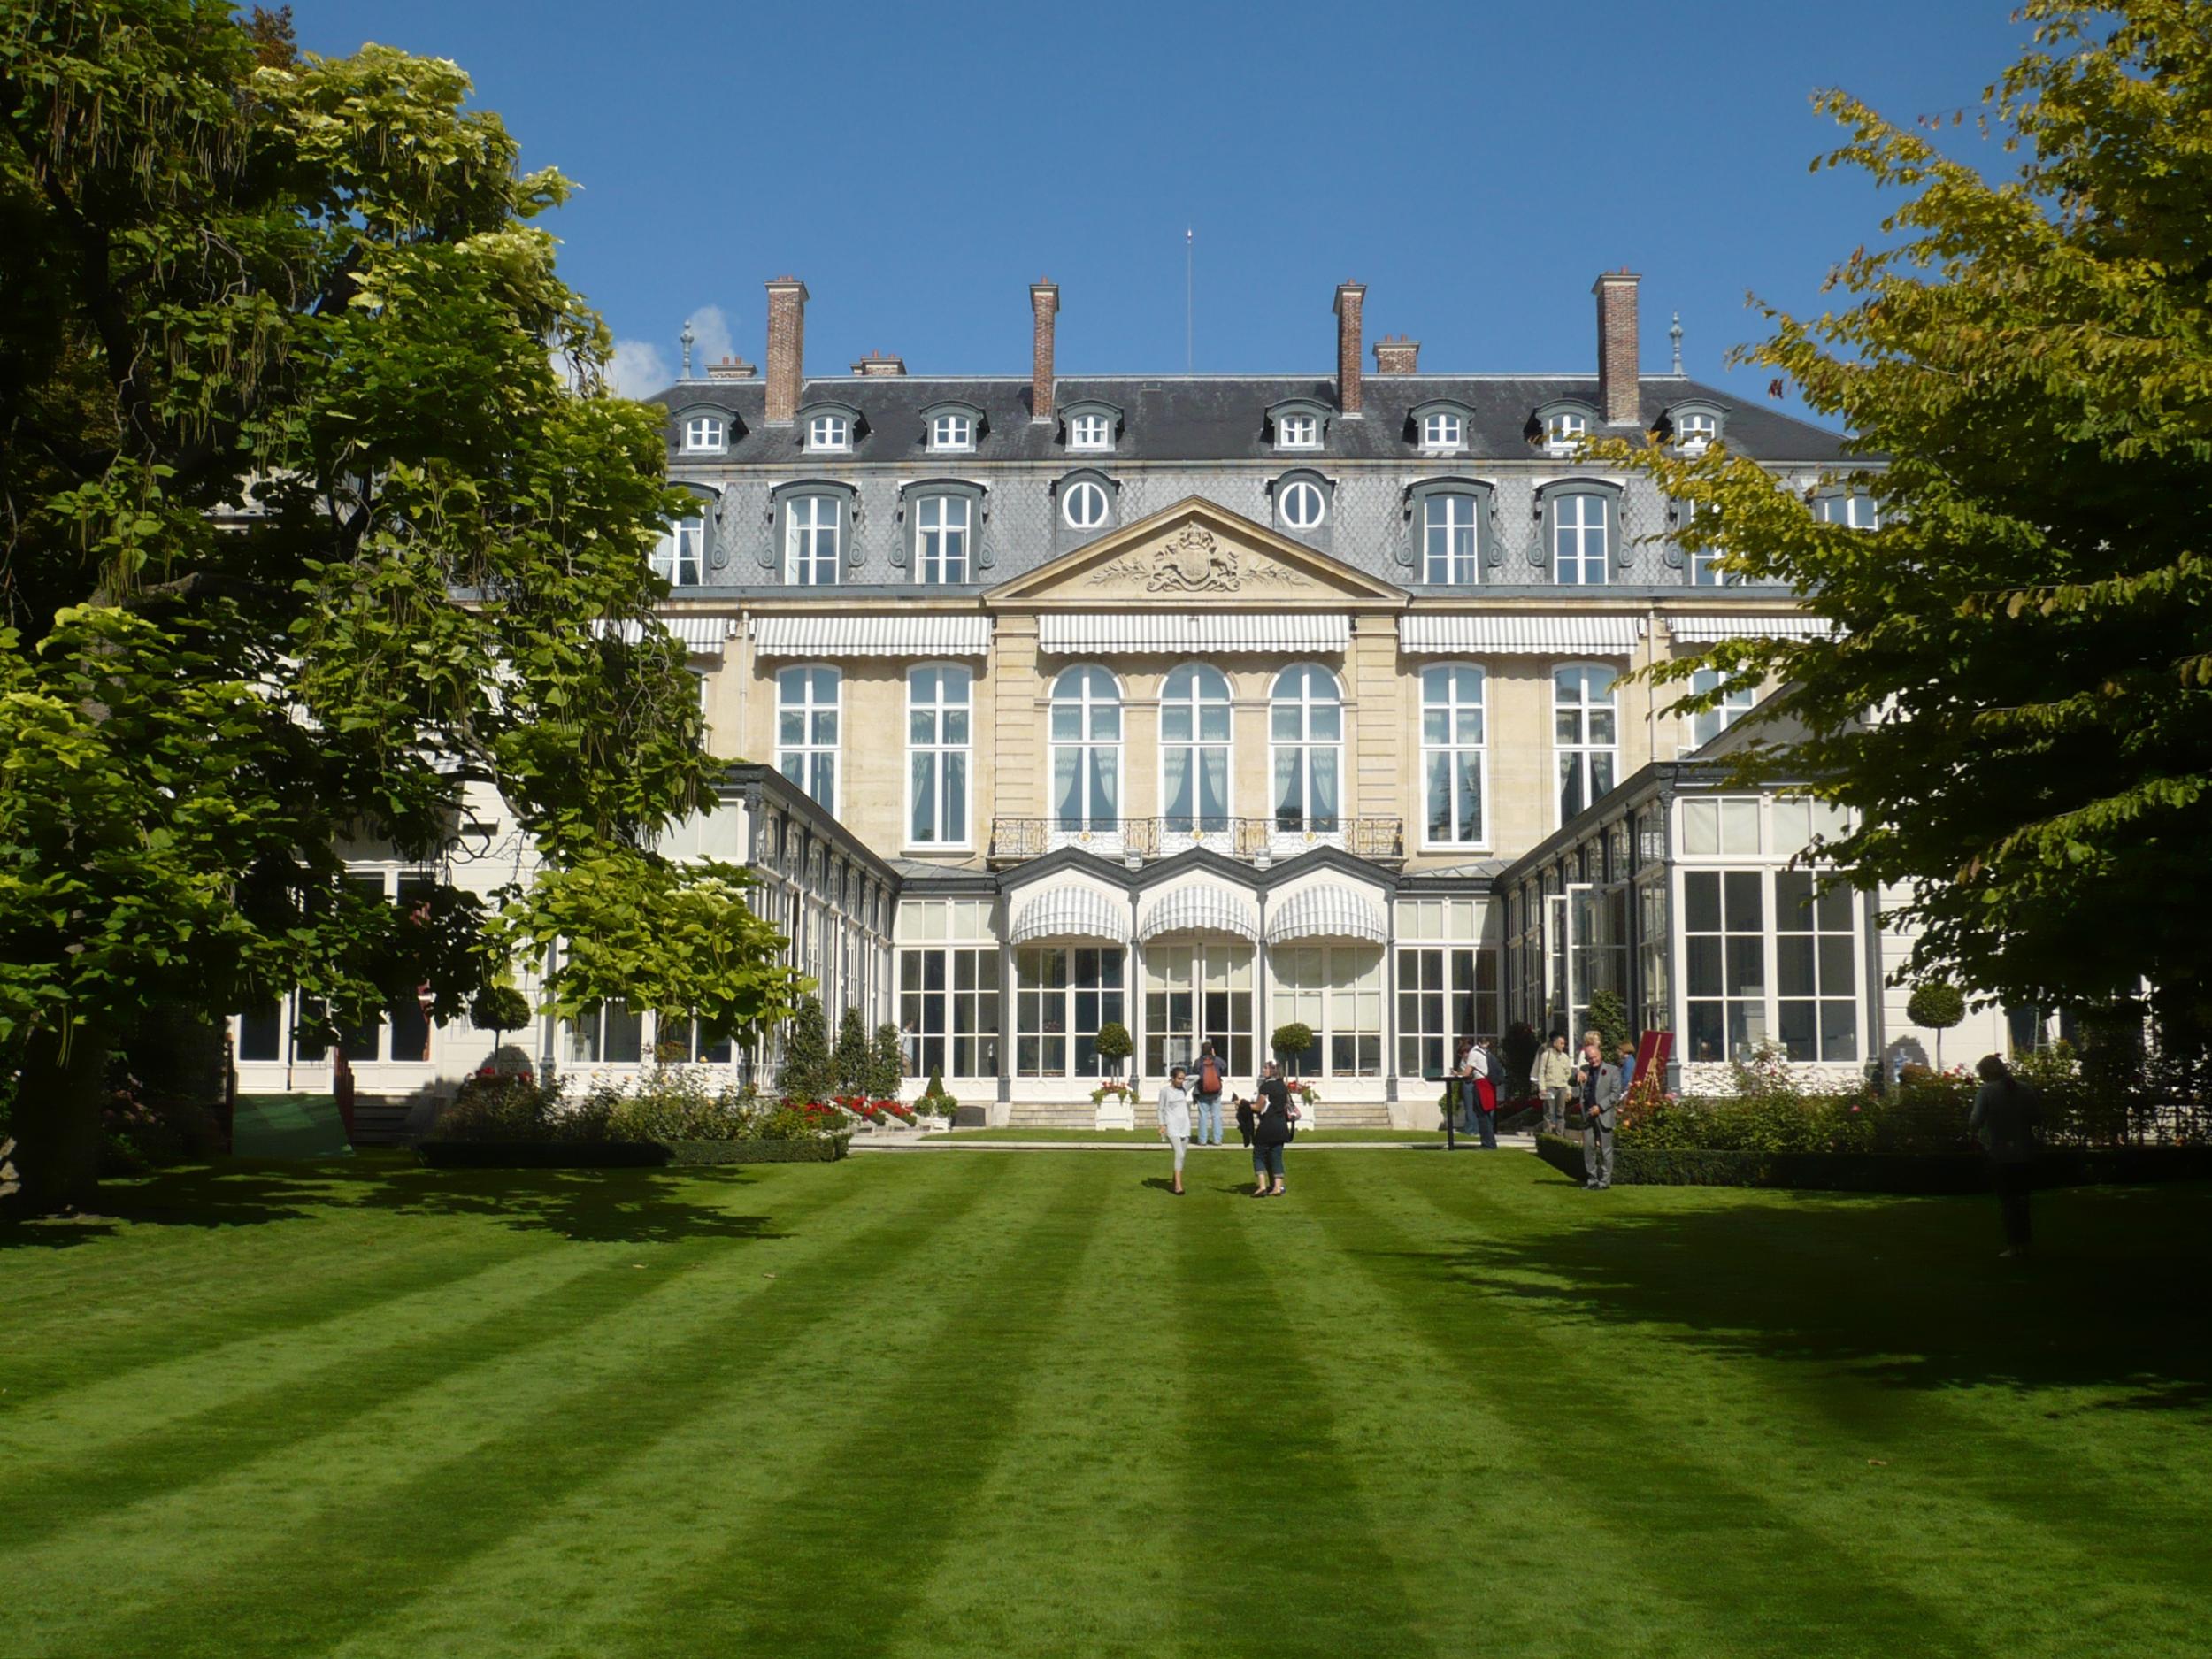 Those registering to vote can win tea at the Hôtel de Charost, the official residence of the United Kingdom ambassador to France